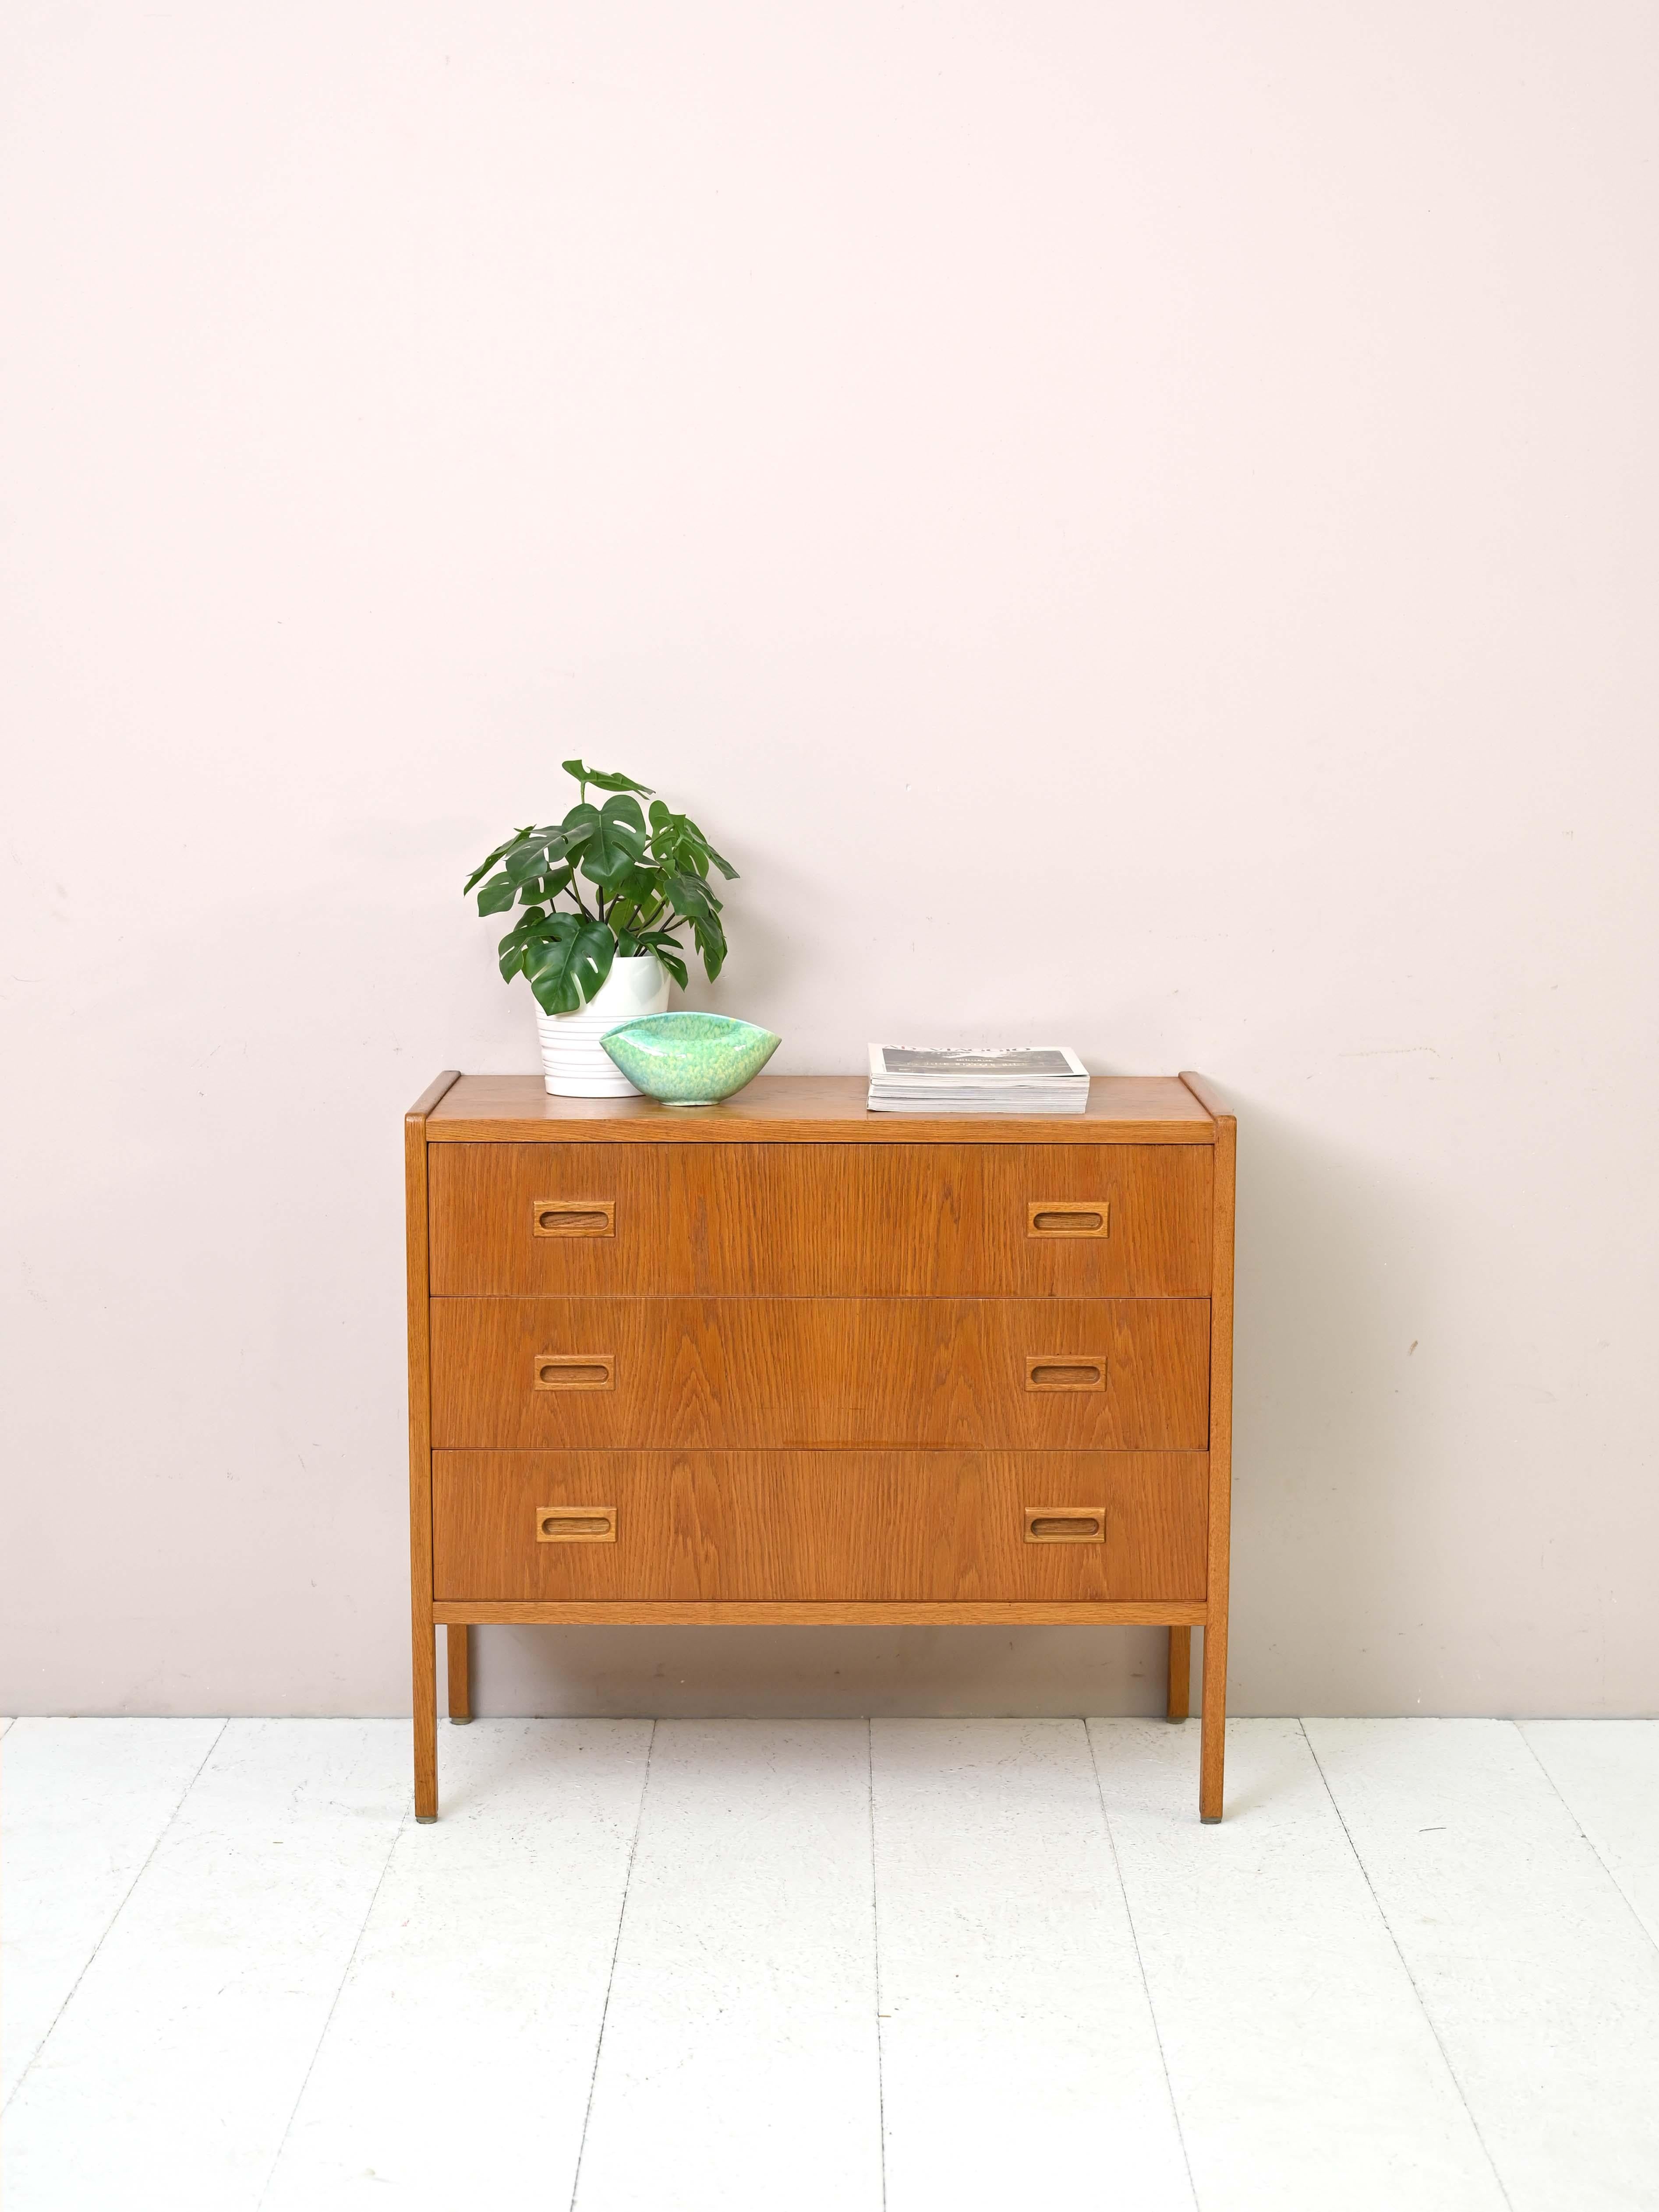 Teak cabinet designed by B.Fridhagen in 1960.
 
This regular, square-shaped chest of drawers is distinguished by the clear oak wood profiles that go into the legs, framing the frame.
Its small size makes it suitable for various rooms in the